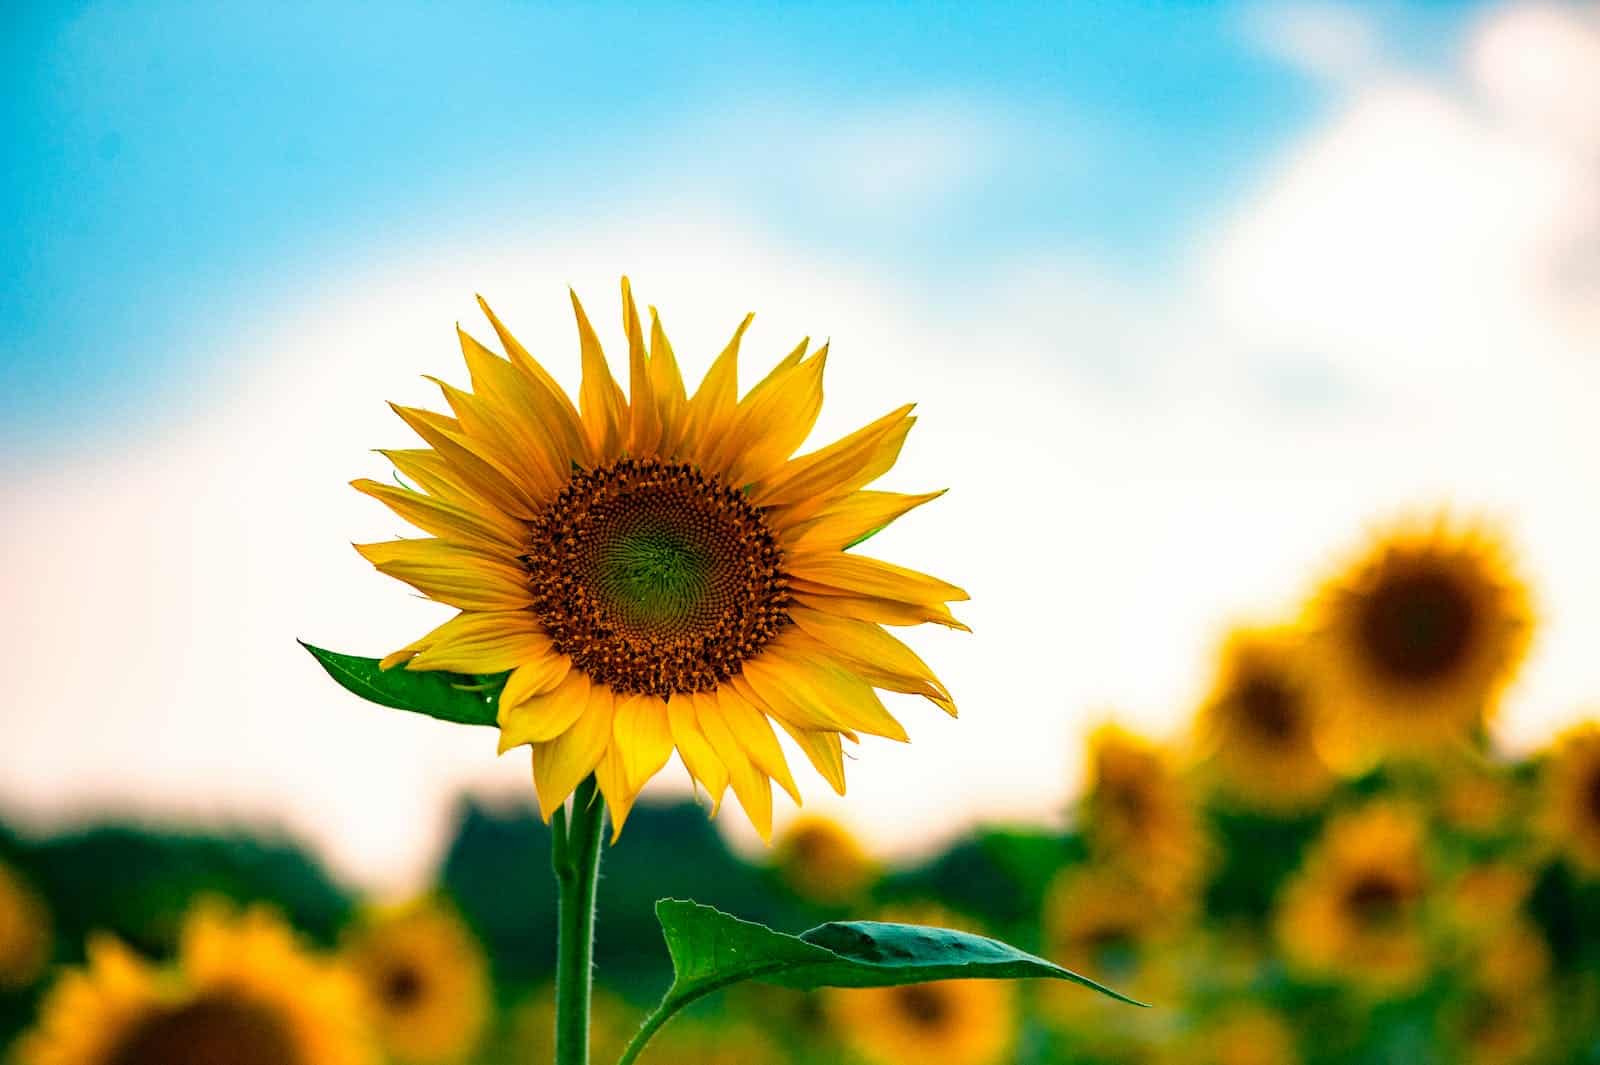 Bright yellow sunflowers in a field under a blue sky with white clouds